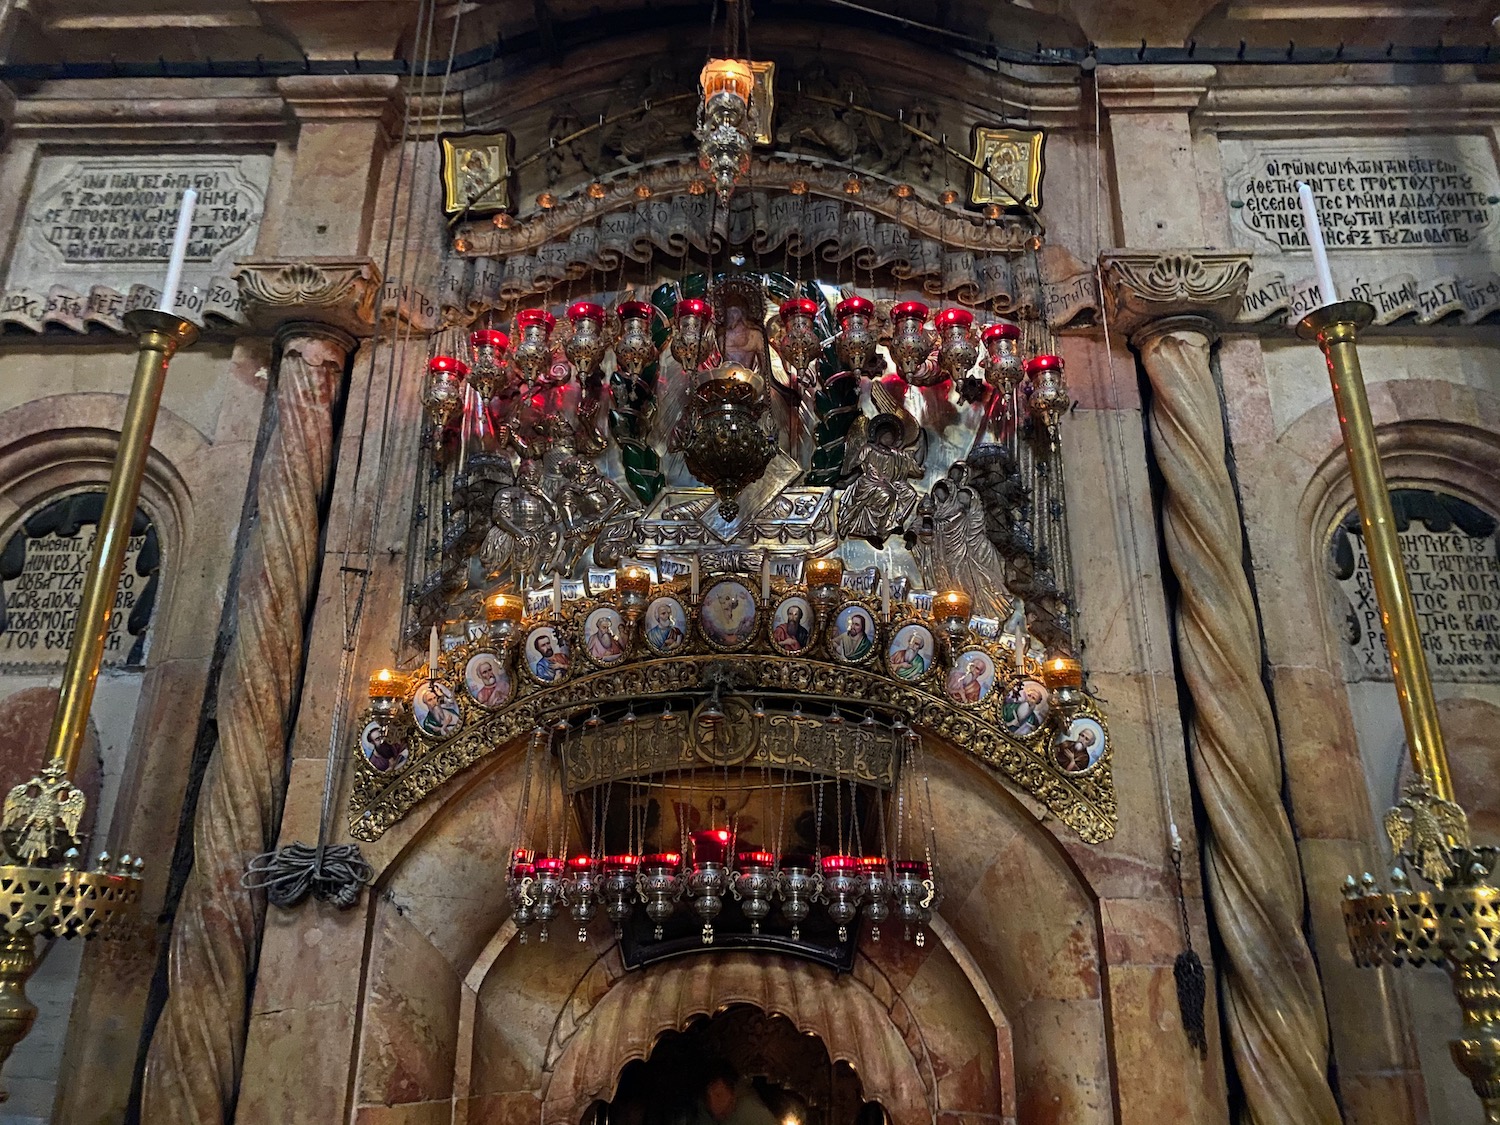 a ornate arch with ornaments and candles